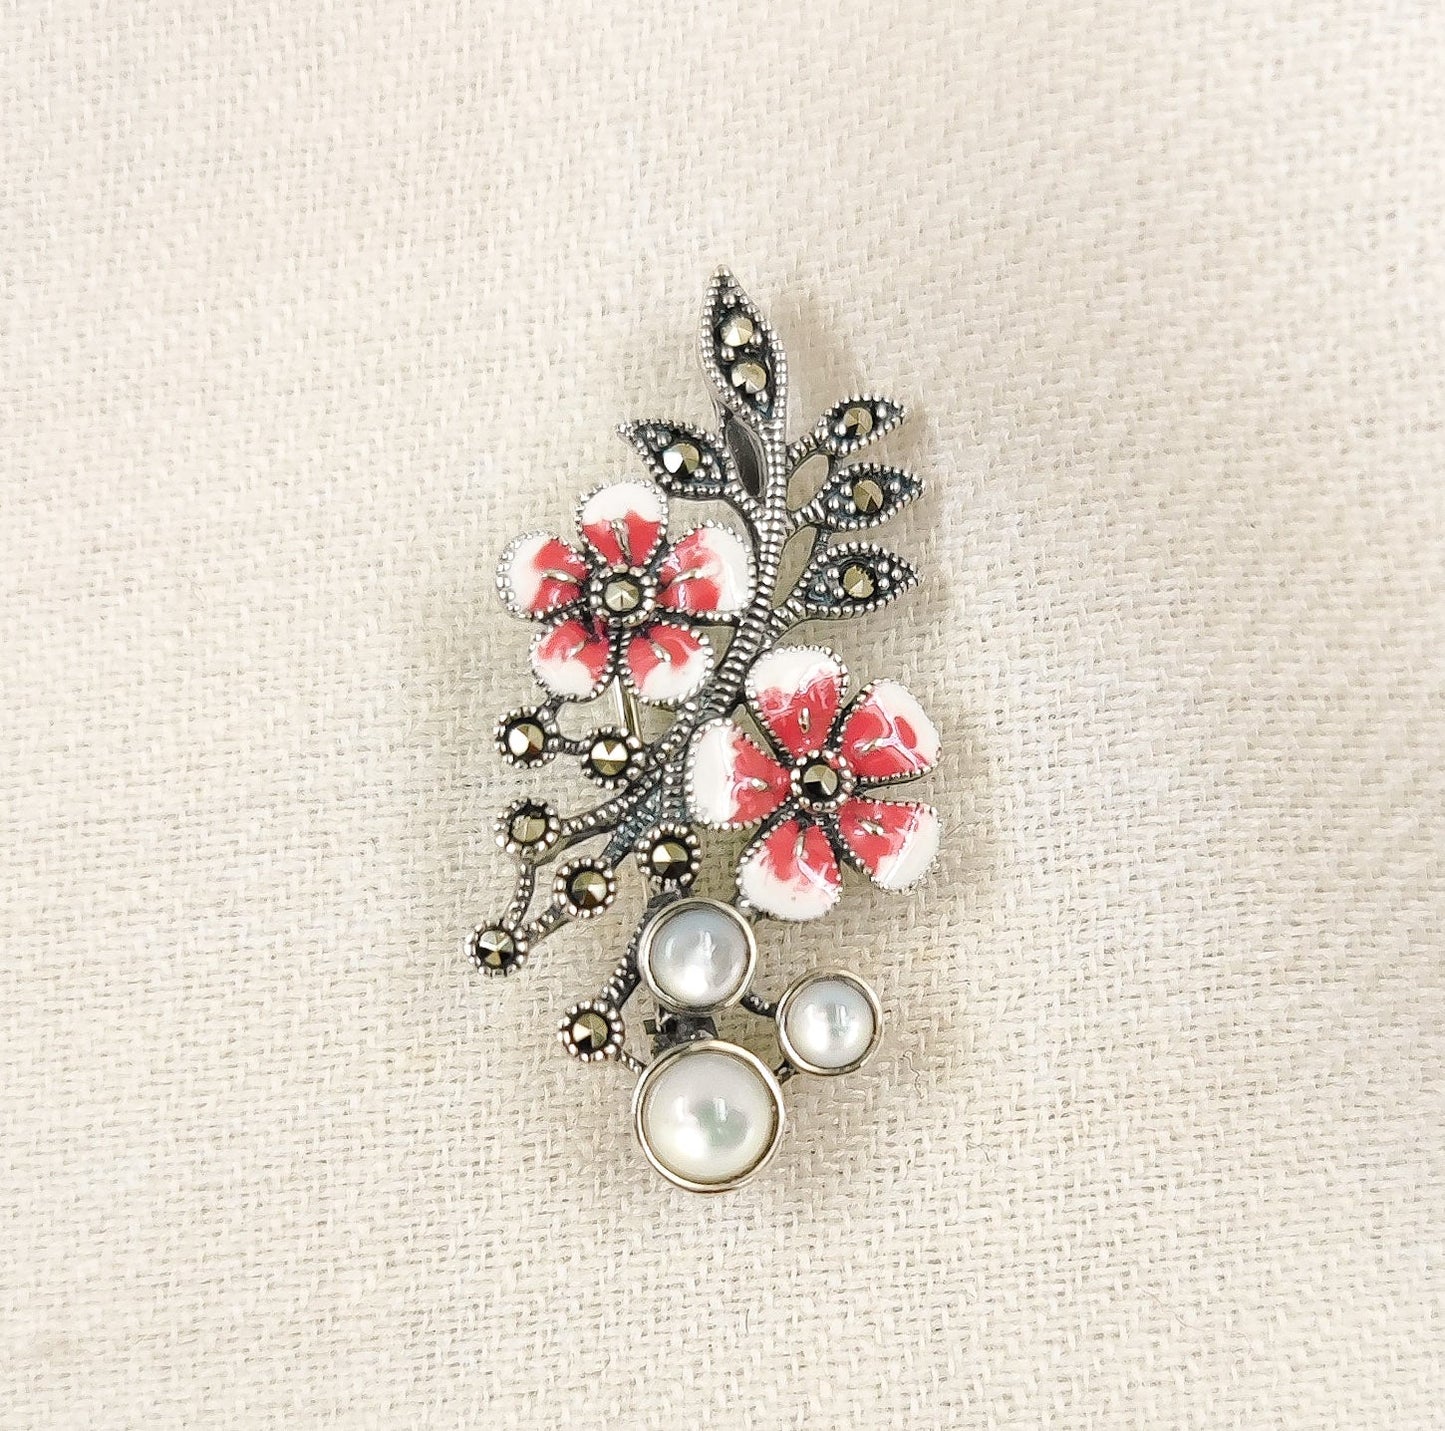 Silver Jewelry Brooches and Lapel Pins by Jauhri 92.5 Silver - Marcasite Flower And Berries Brooch And Pendant